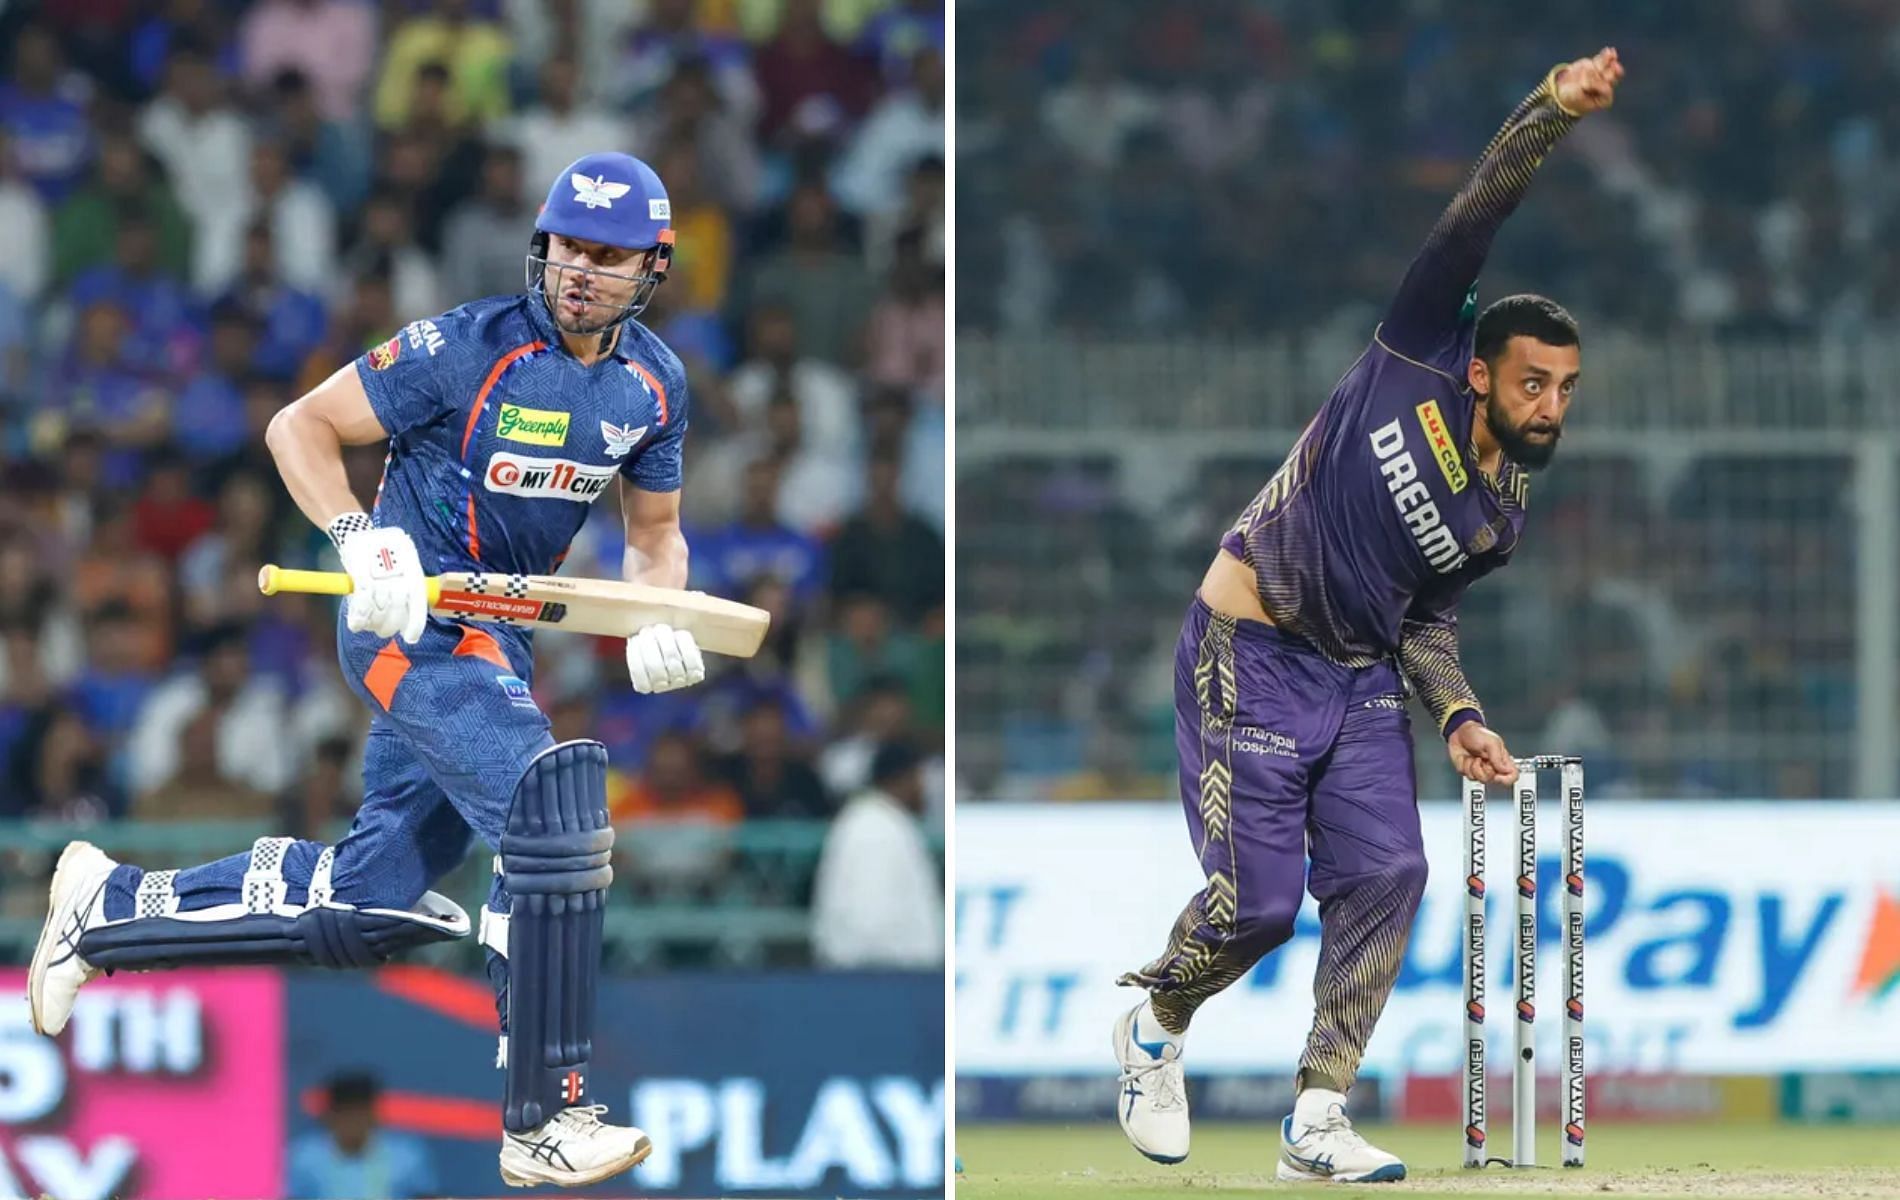 Marus Stoinis (L) has gotten out to Varun Chakravarthy (R) twice in four IPL innings.